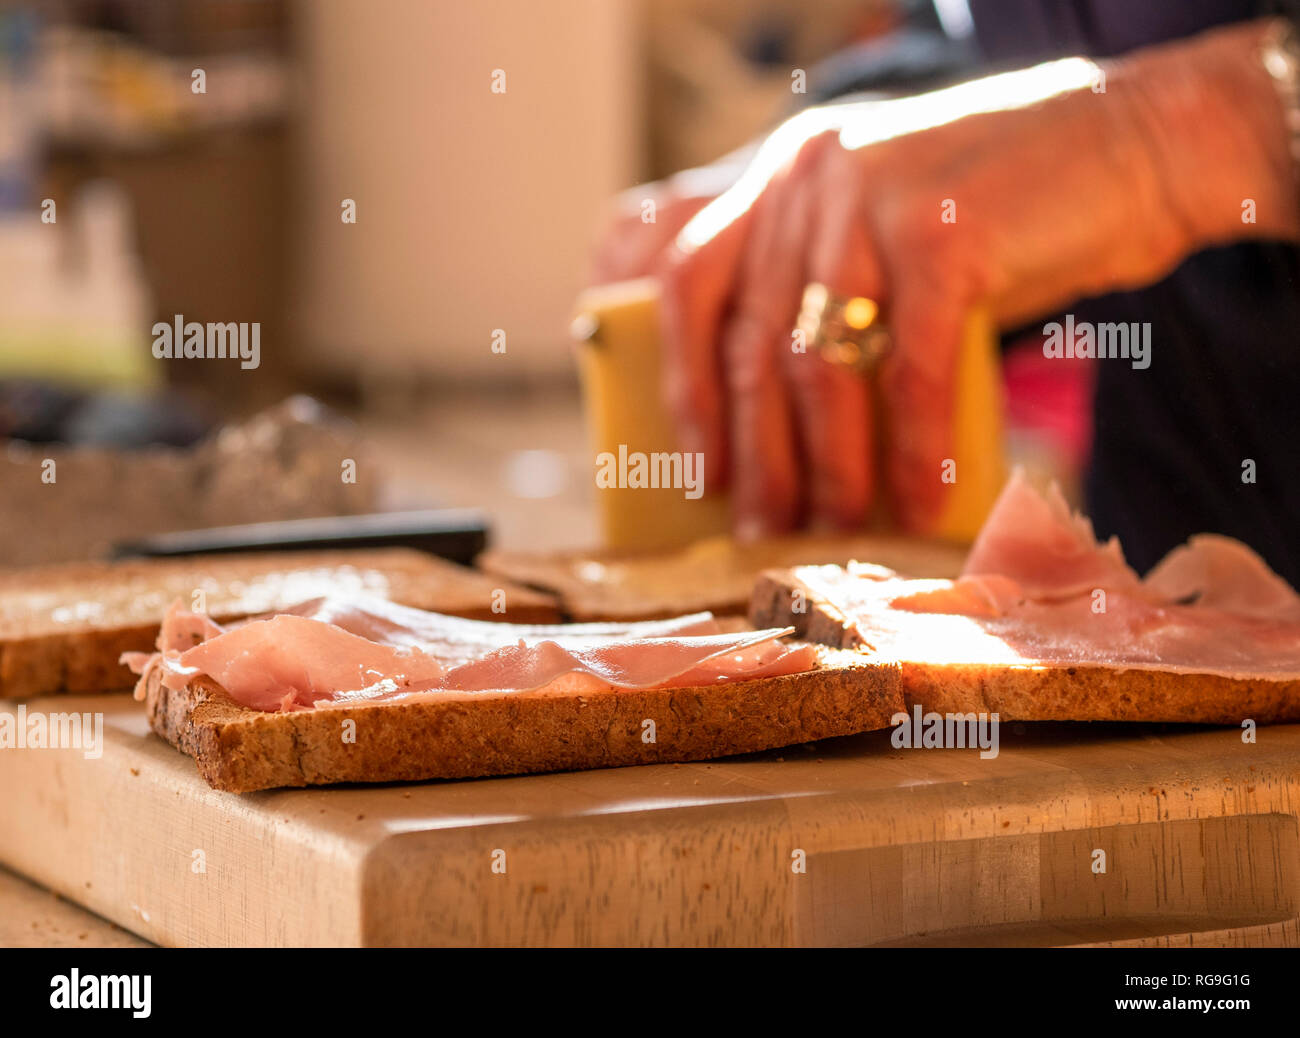 Woman cutting cheese in the background while making sandwiches Stock Photo